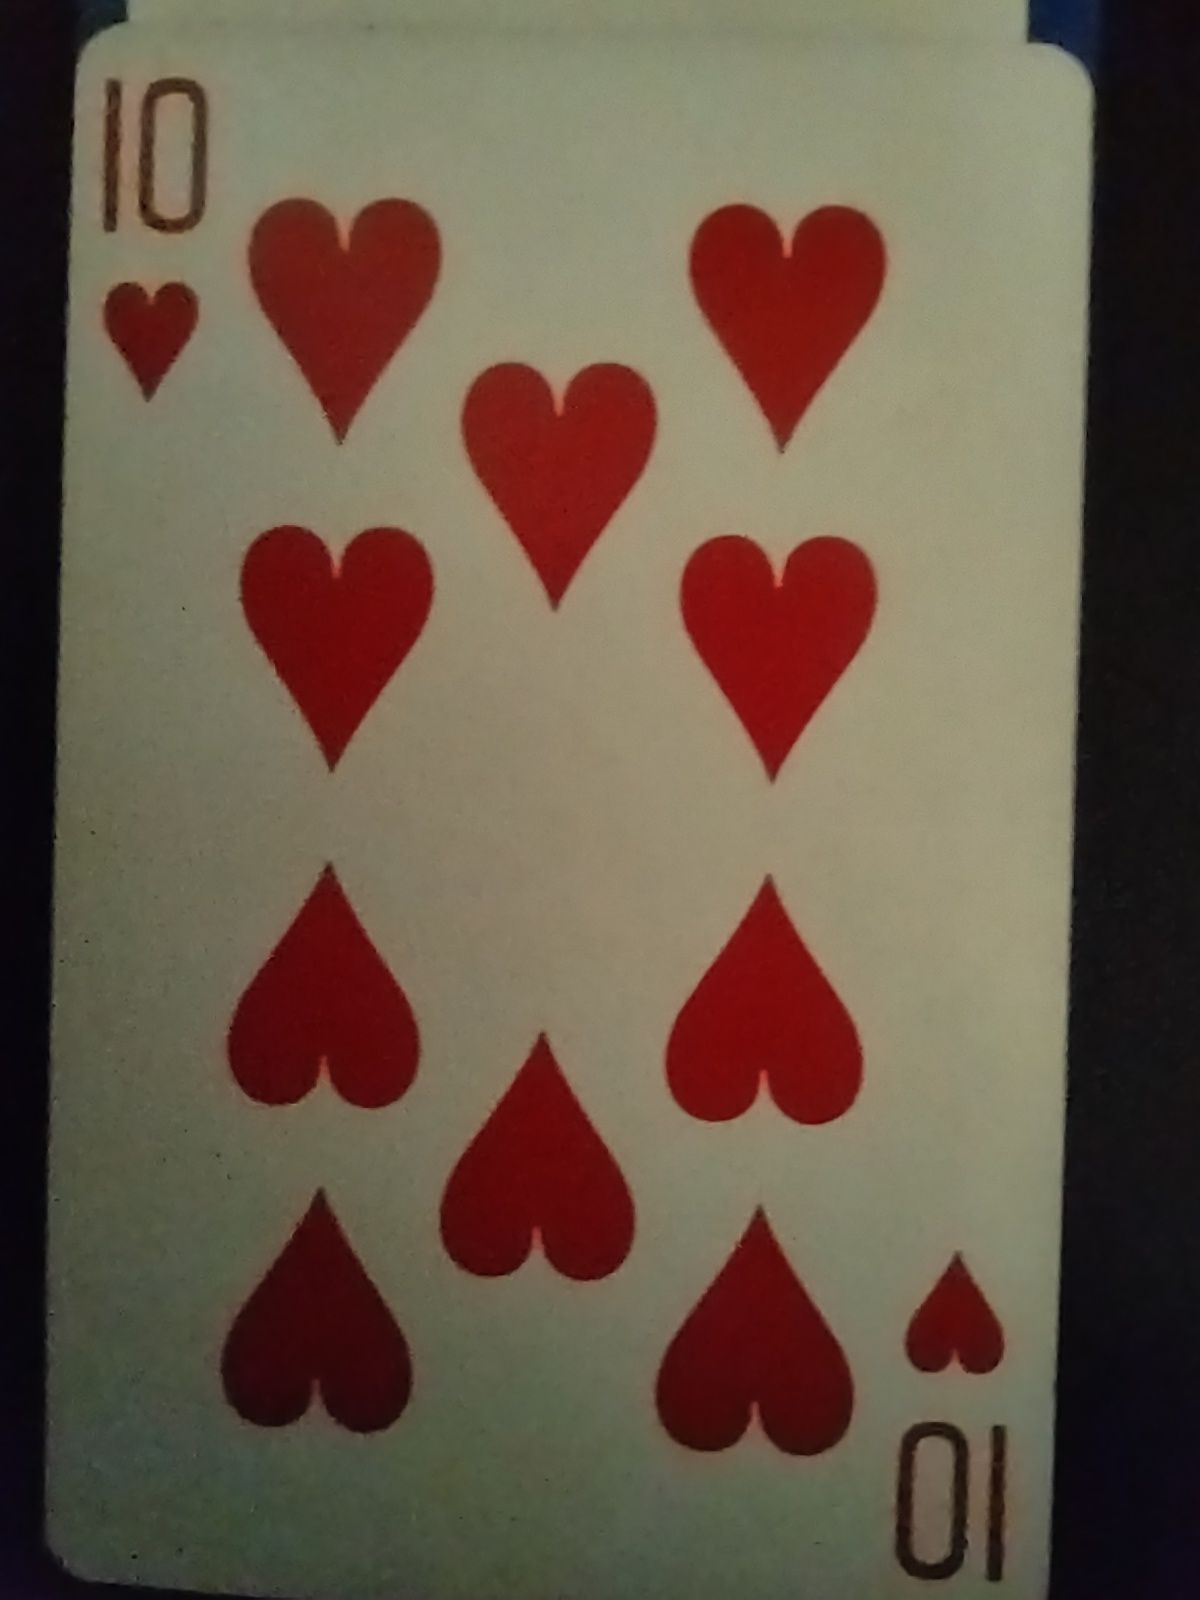 10 of hearts. From a standard Bicycle deck.